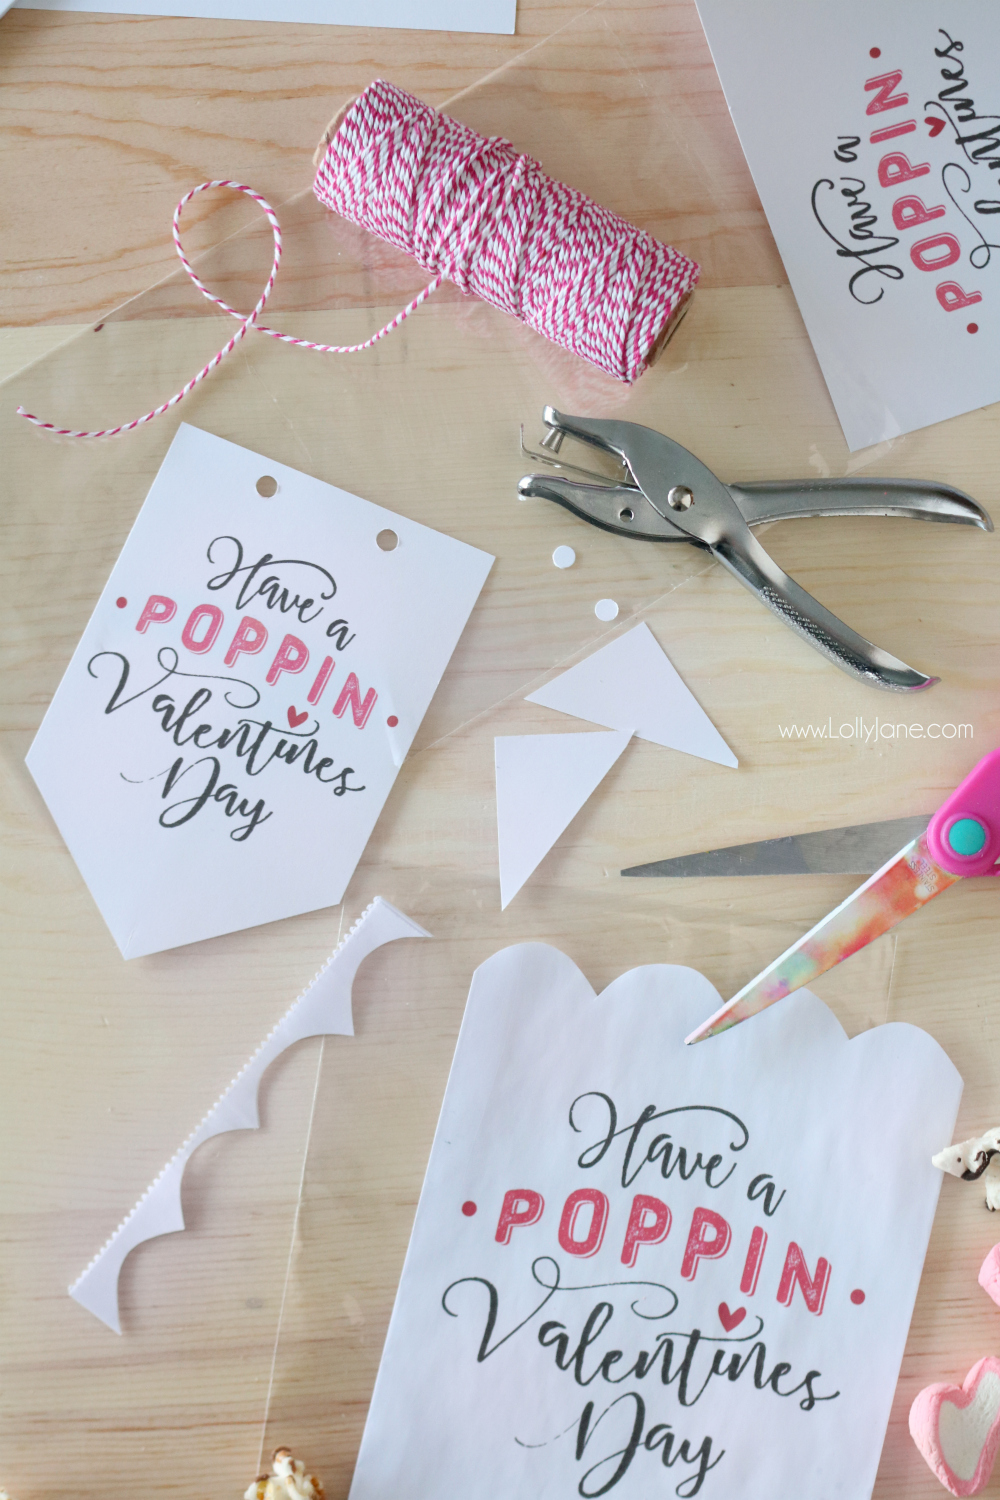 free printable "Have a Poppin' Valentines Day" tag popcorn mix recipe